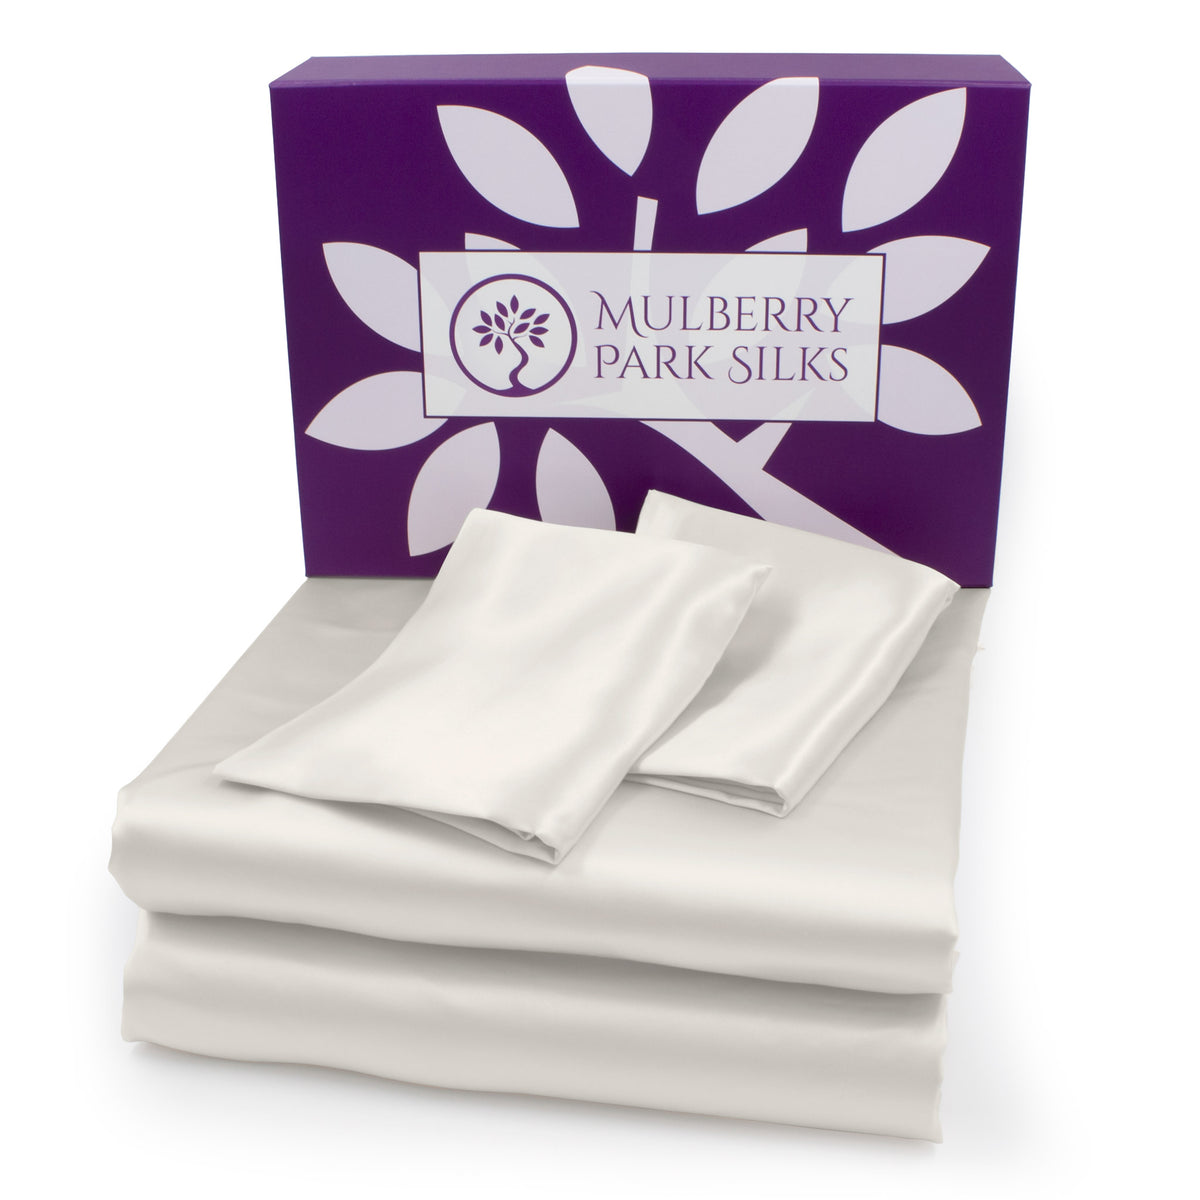 Mulberry Park Silks 22 Momme Silk Sheet Sets Ivory with Giftbox